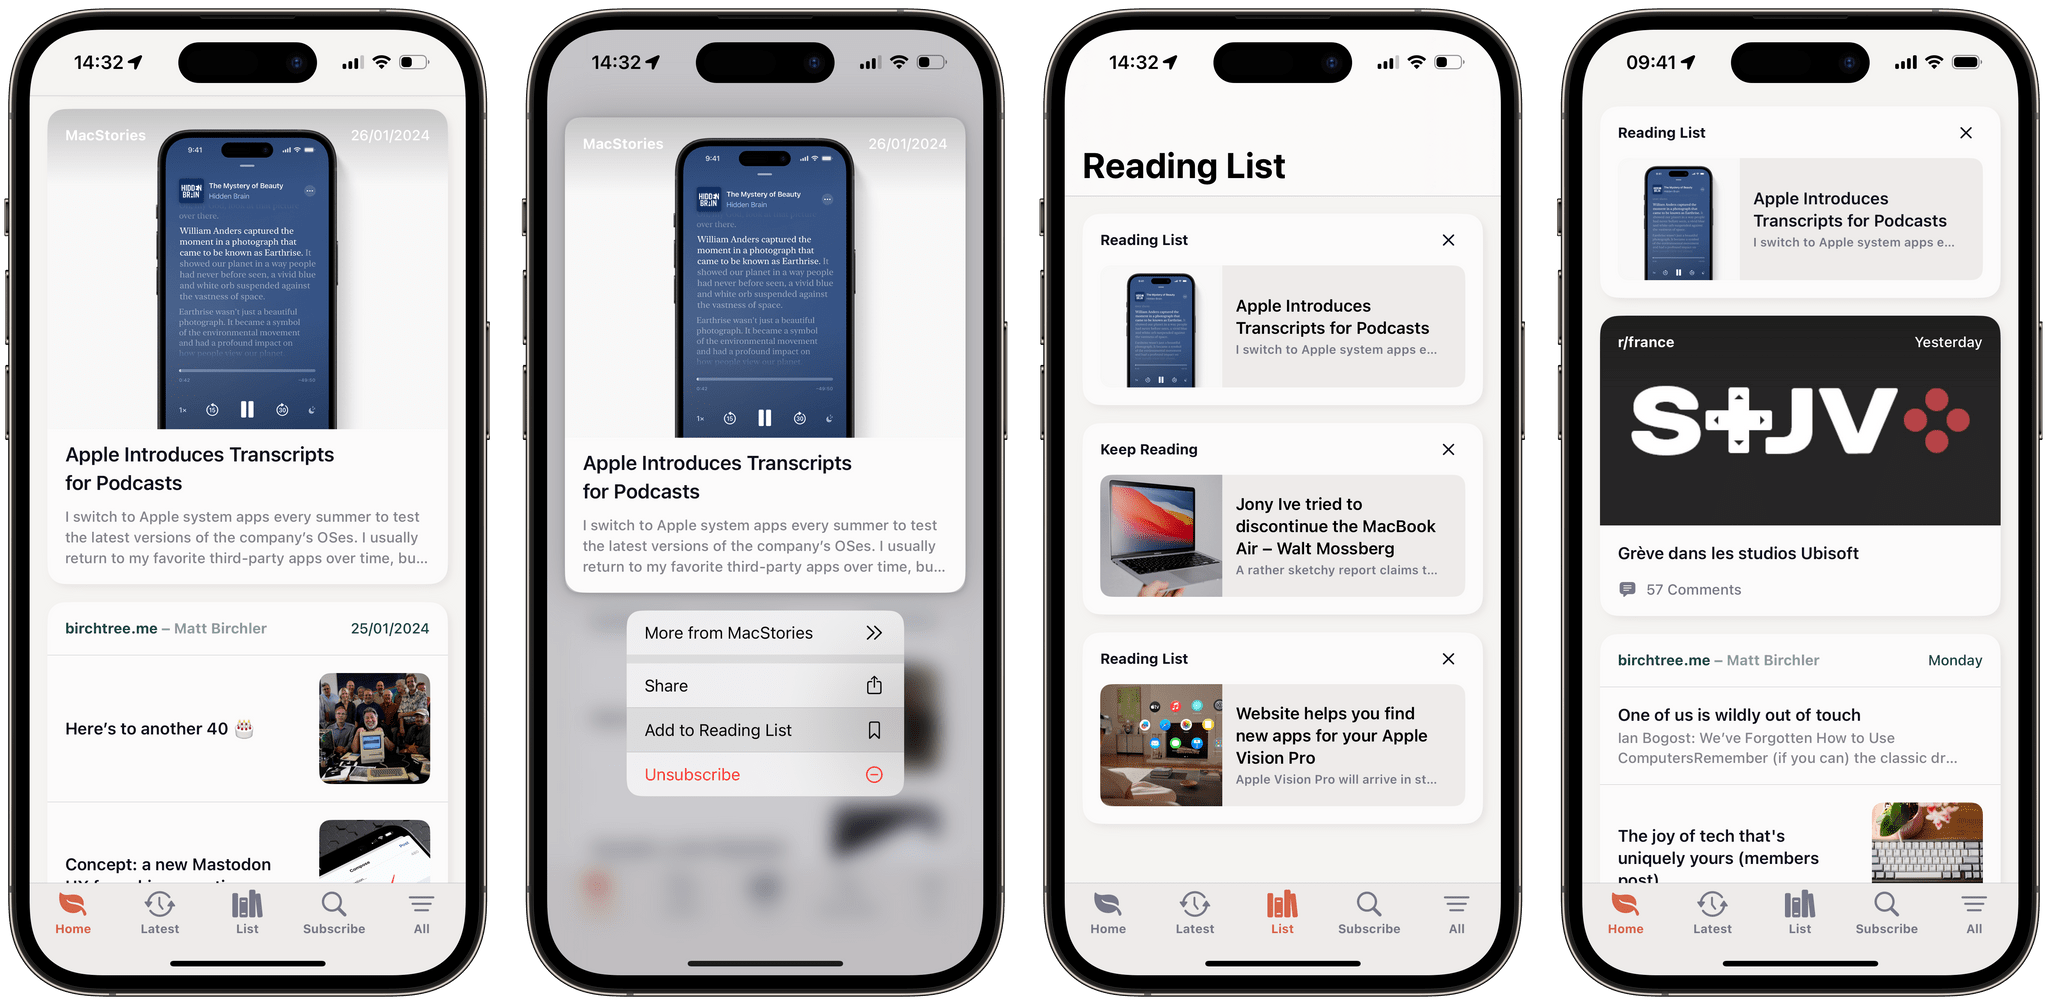 Long-press a card to add it to your Reading List. Reading List items show up in their own 'List' tab, and occasionally in the main 'Home' and 'Latest' tabs.